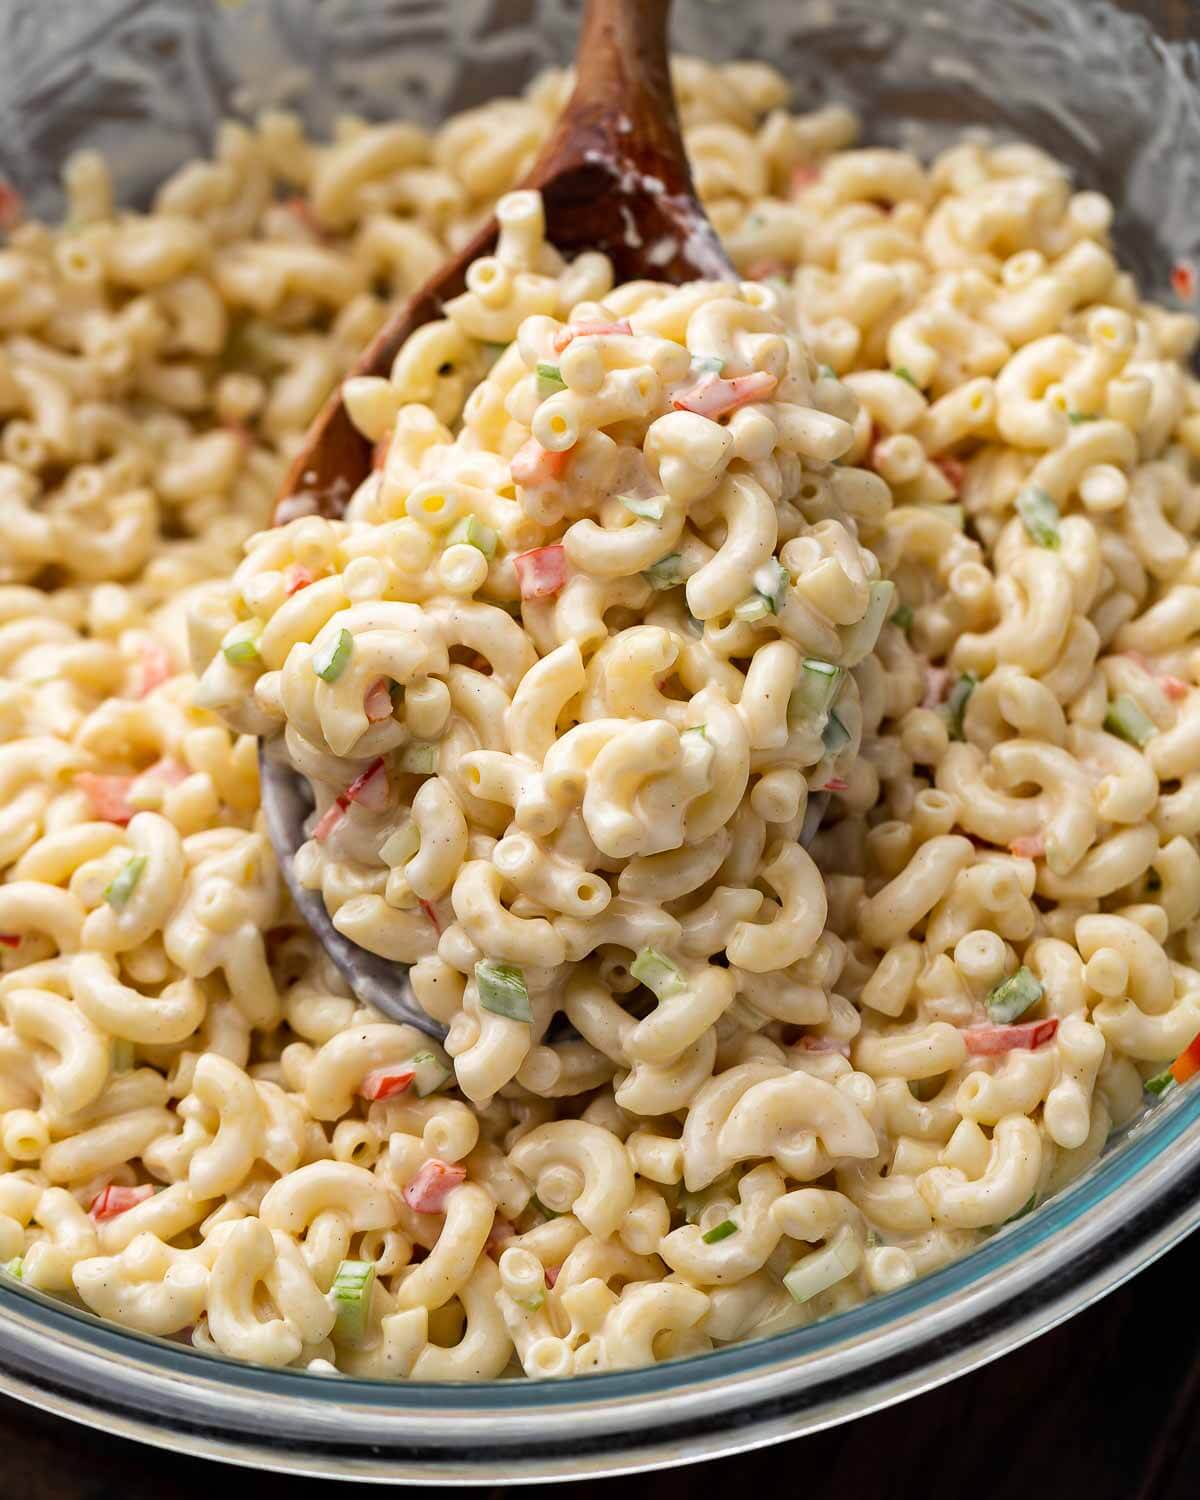 Deli macaroni salad in glass bowl with wooden spoon.